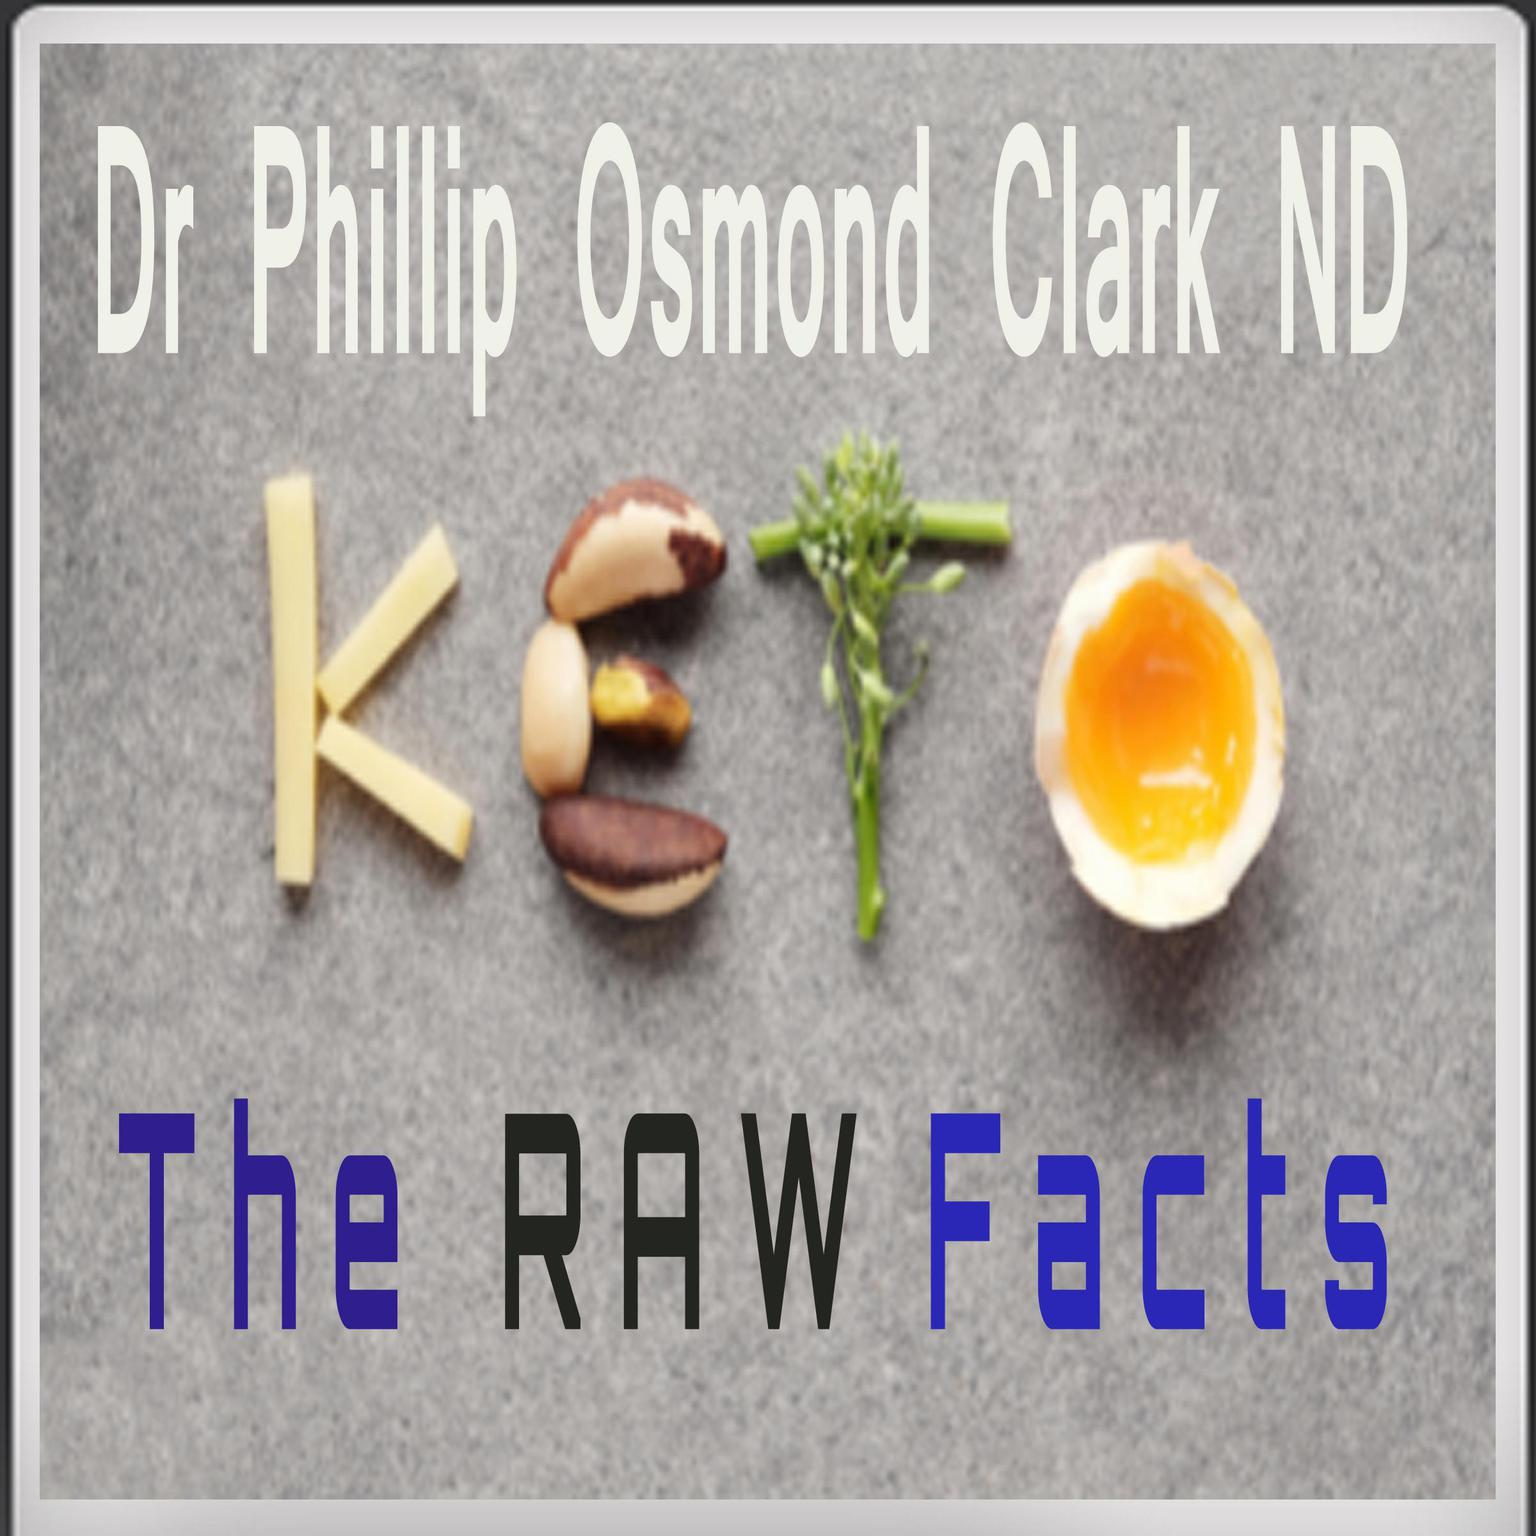 Keto - The Raw Facts Audiobook, by Phillip Osmond Clark